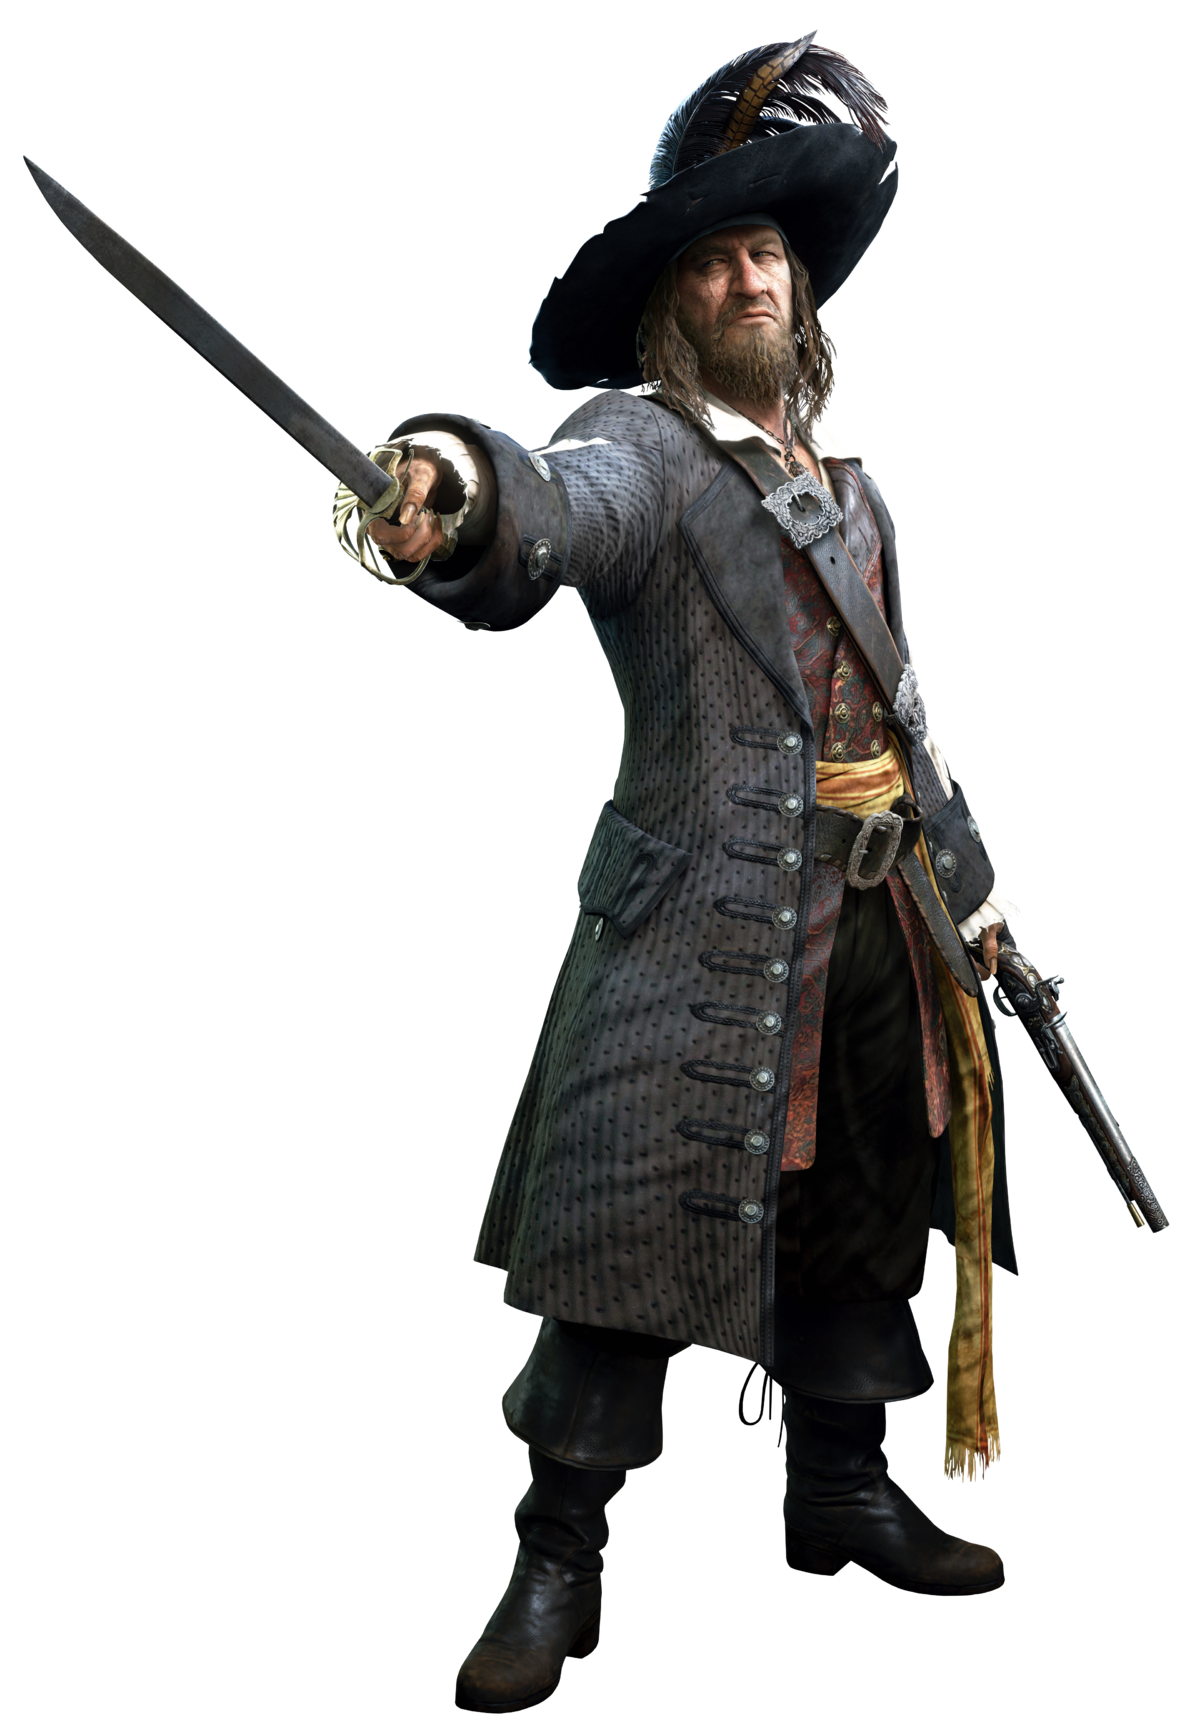 Anyone know what type of hat barbossa wears? Want to get a similar